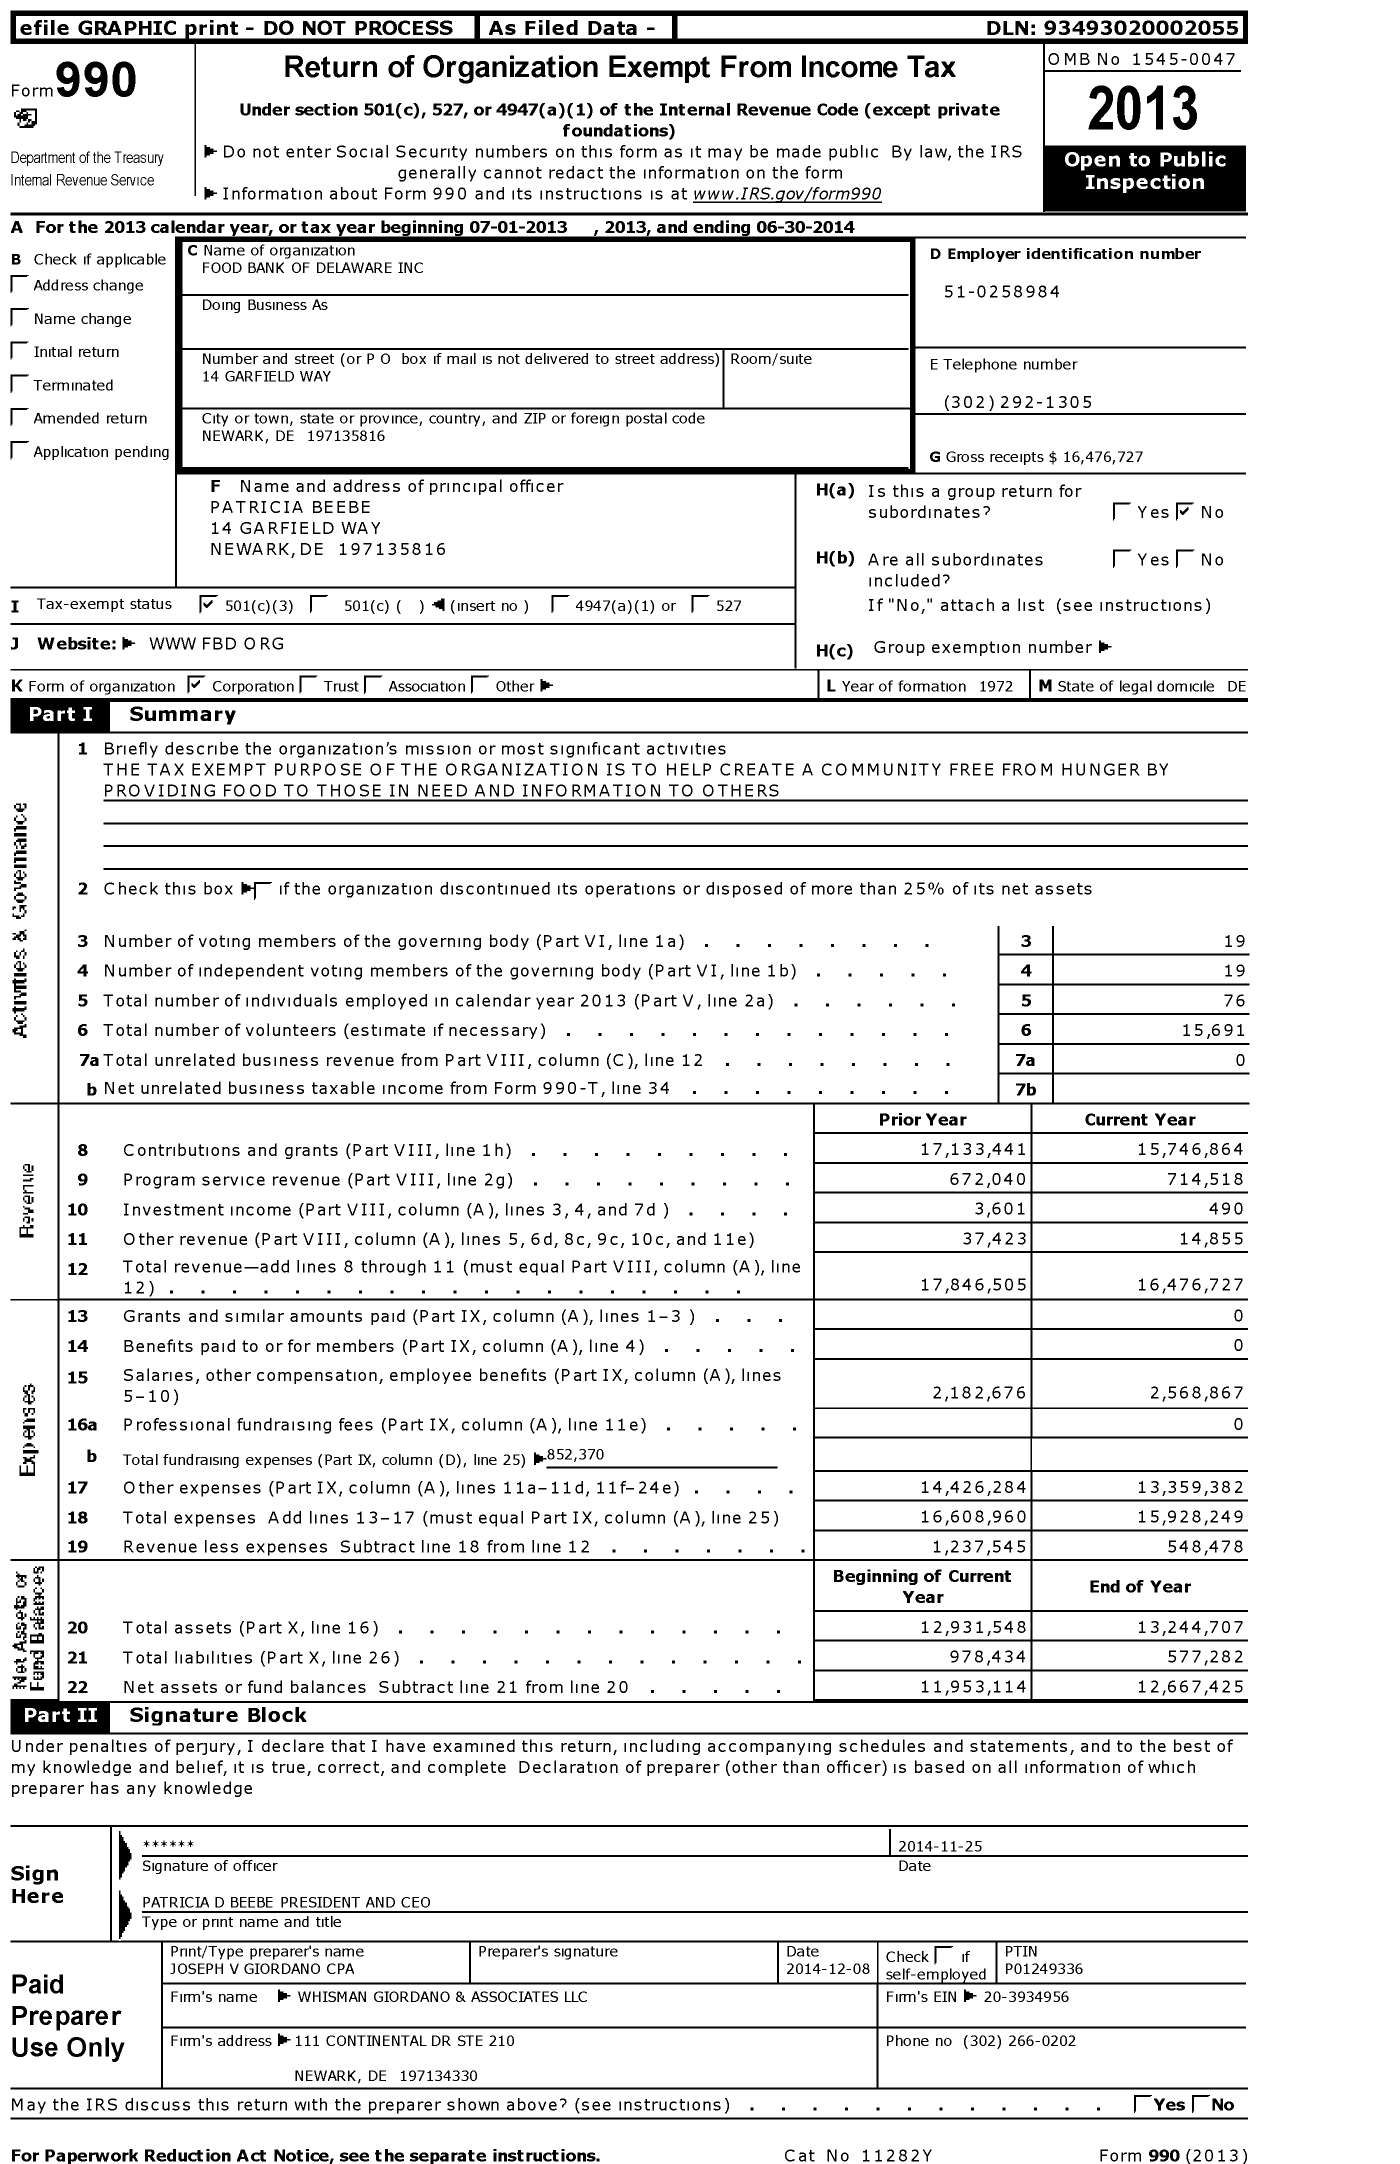 Image of first page of 2013 Form 990 for Food Bank of Delaware (FBD)